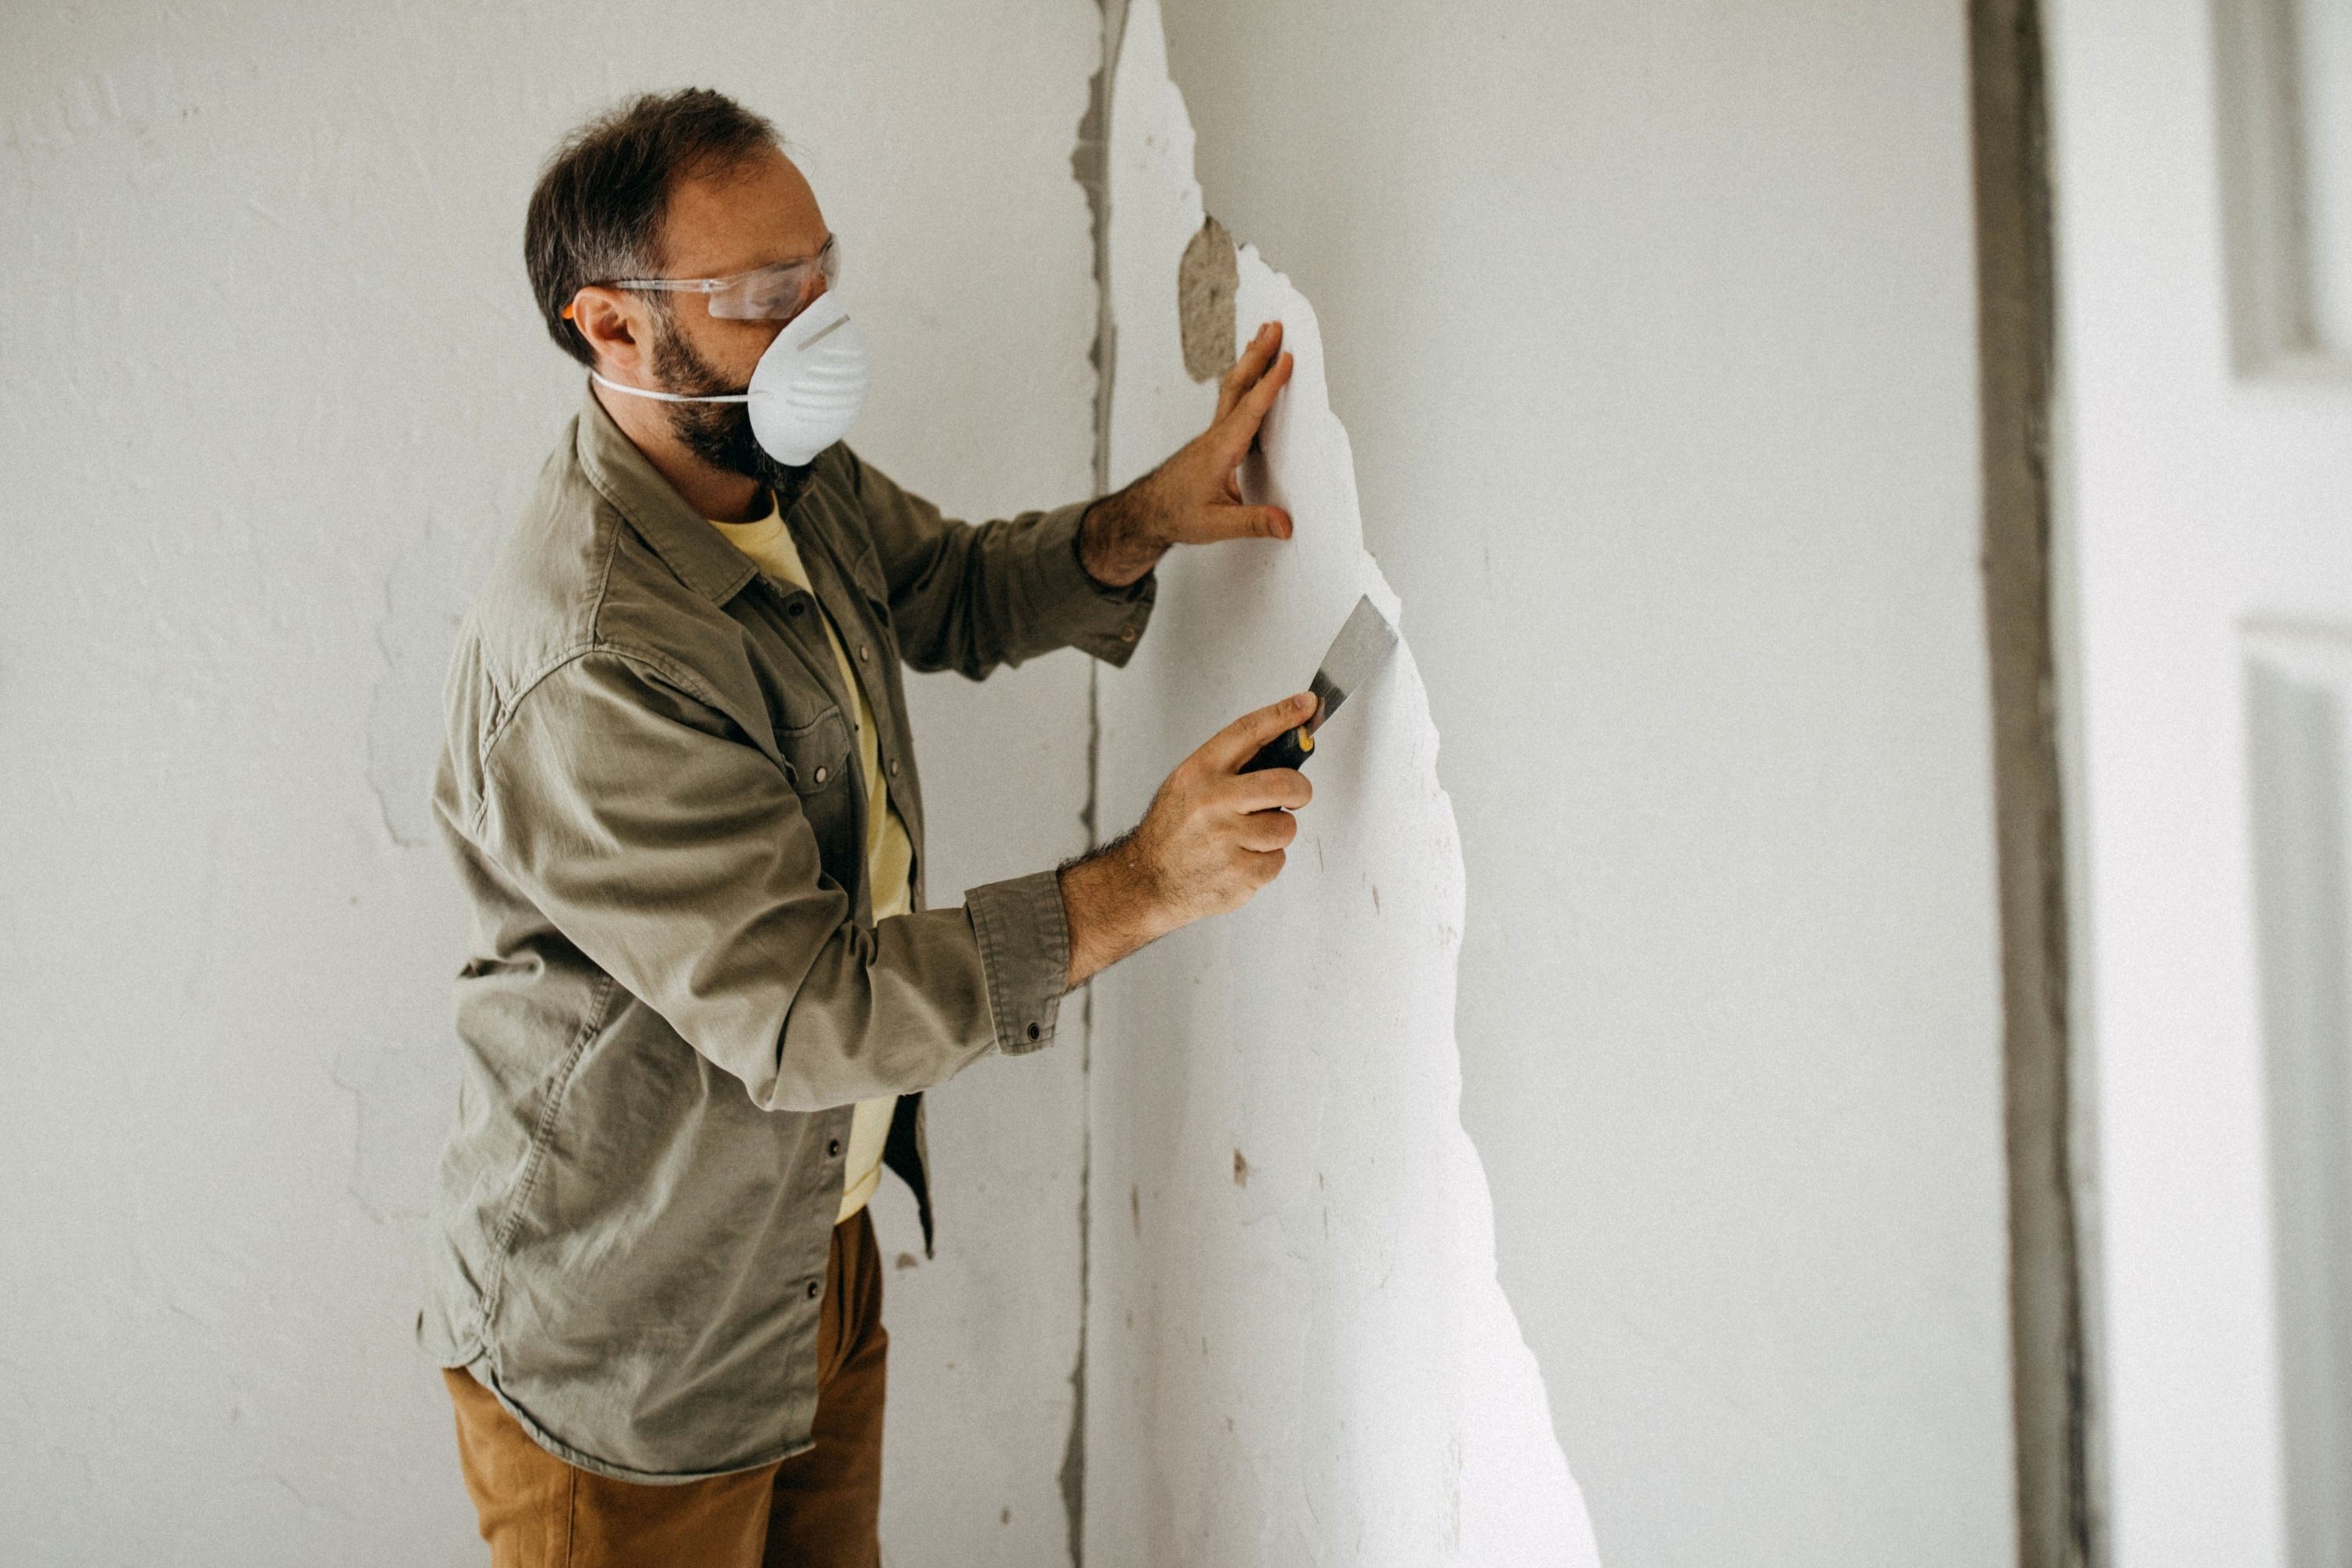 How to Avoid Wall Damage When Scraping